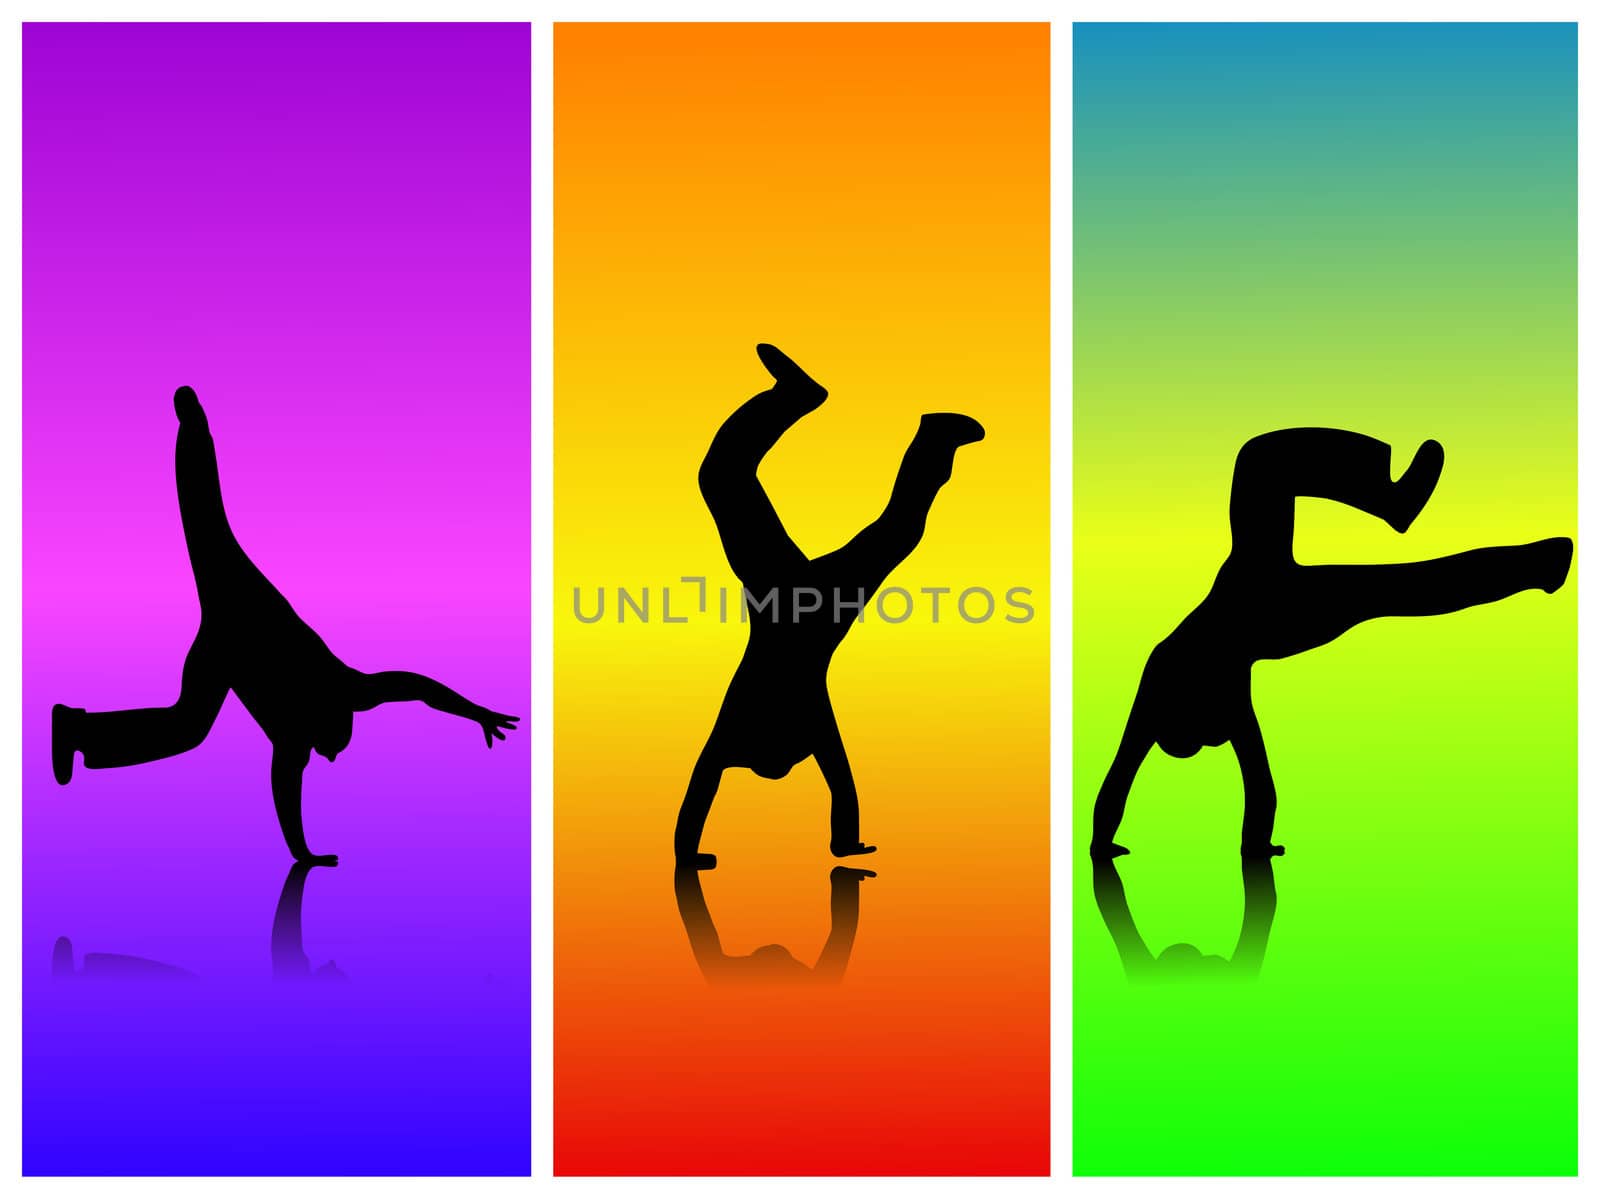 Image of various silhouettes flipping against a colorful background.